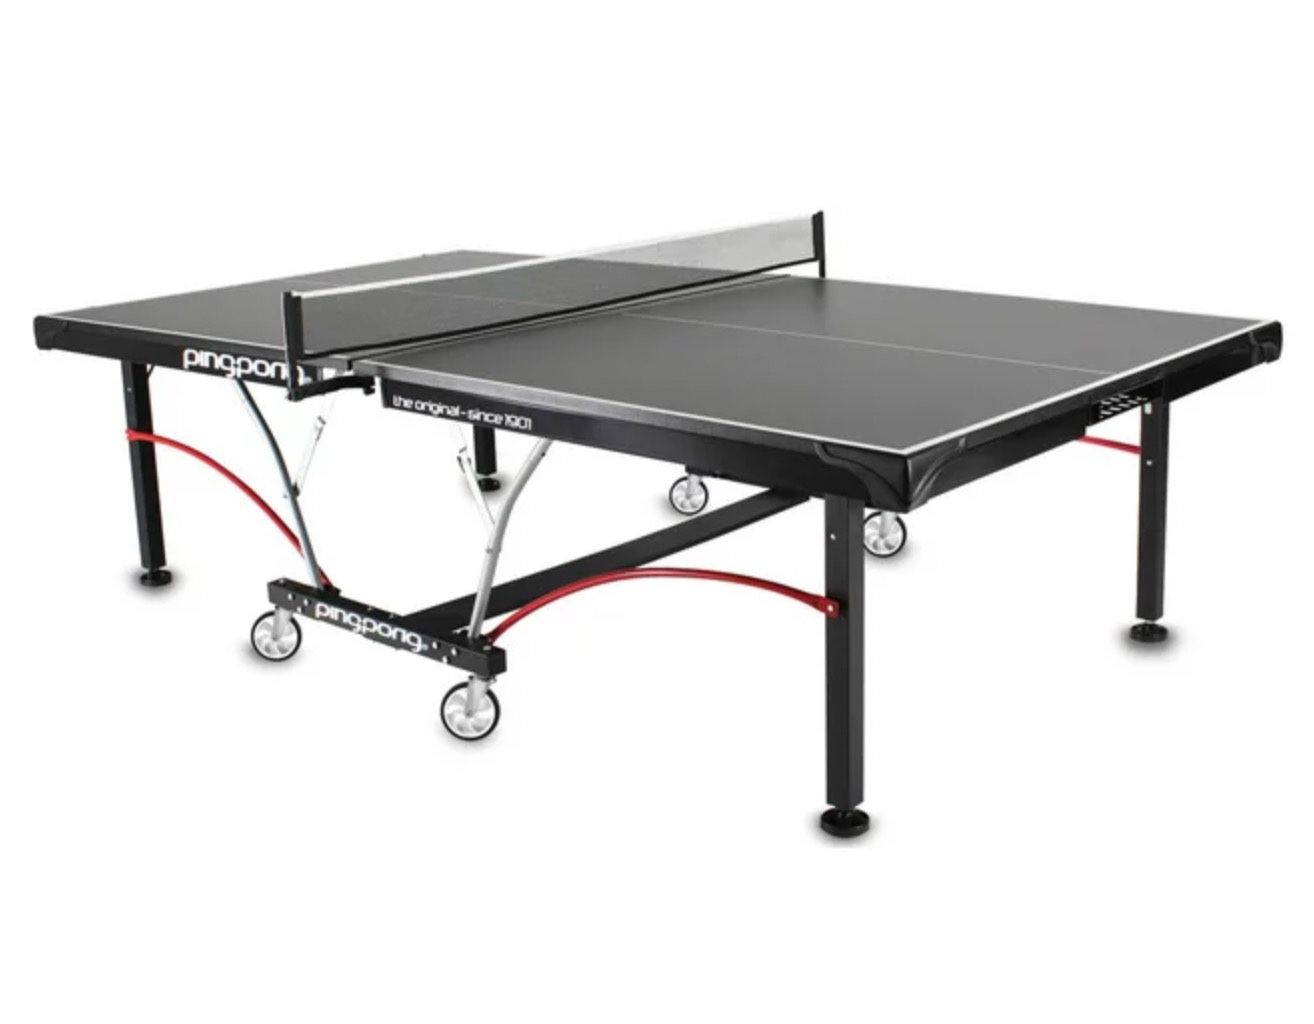 Ping-Pong Elite II Table Foldable Regulation Size Tennis Table w/ Caster Wheels